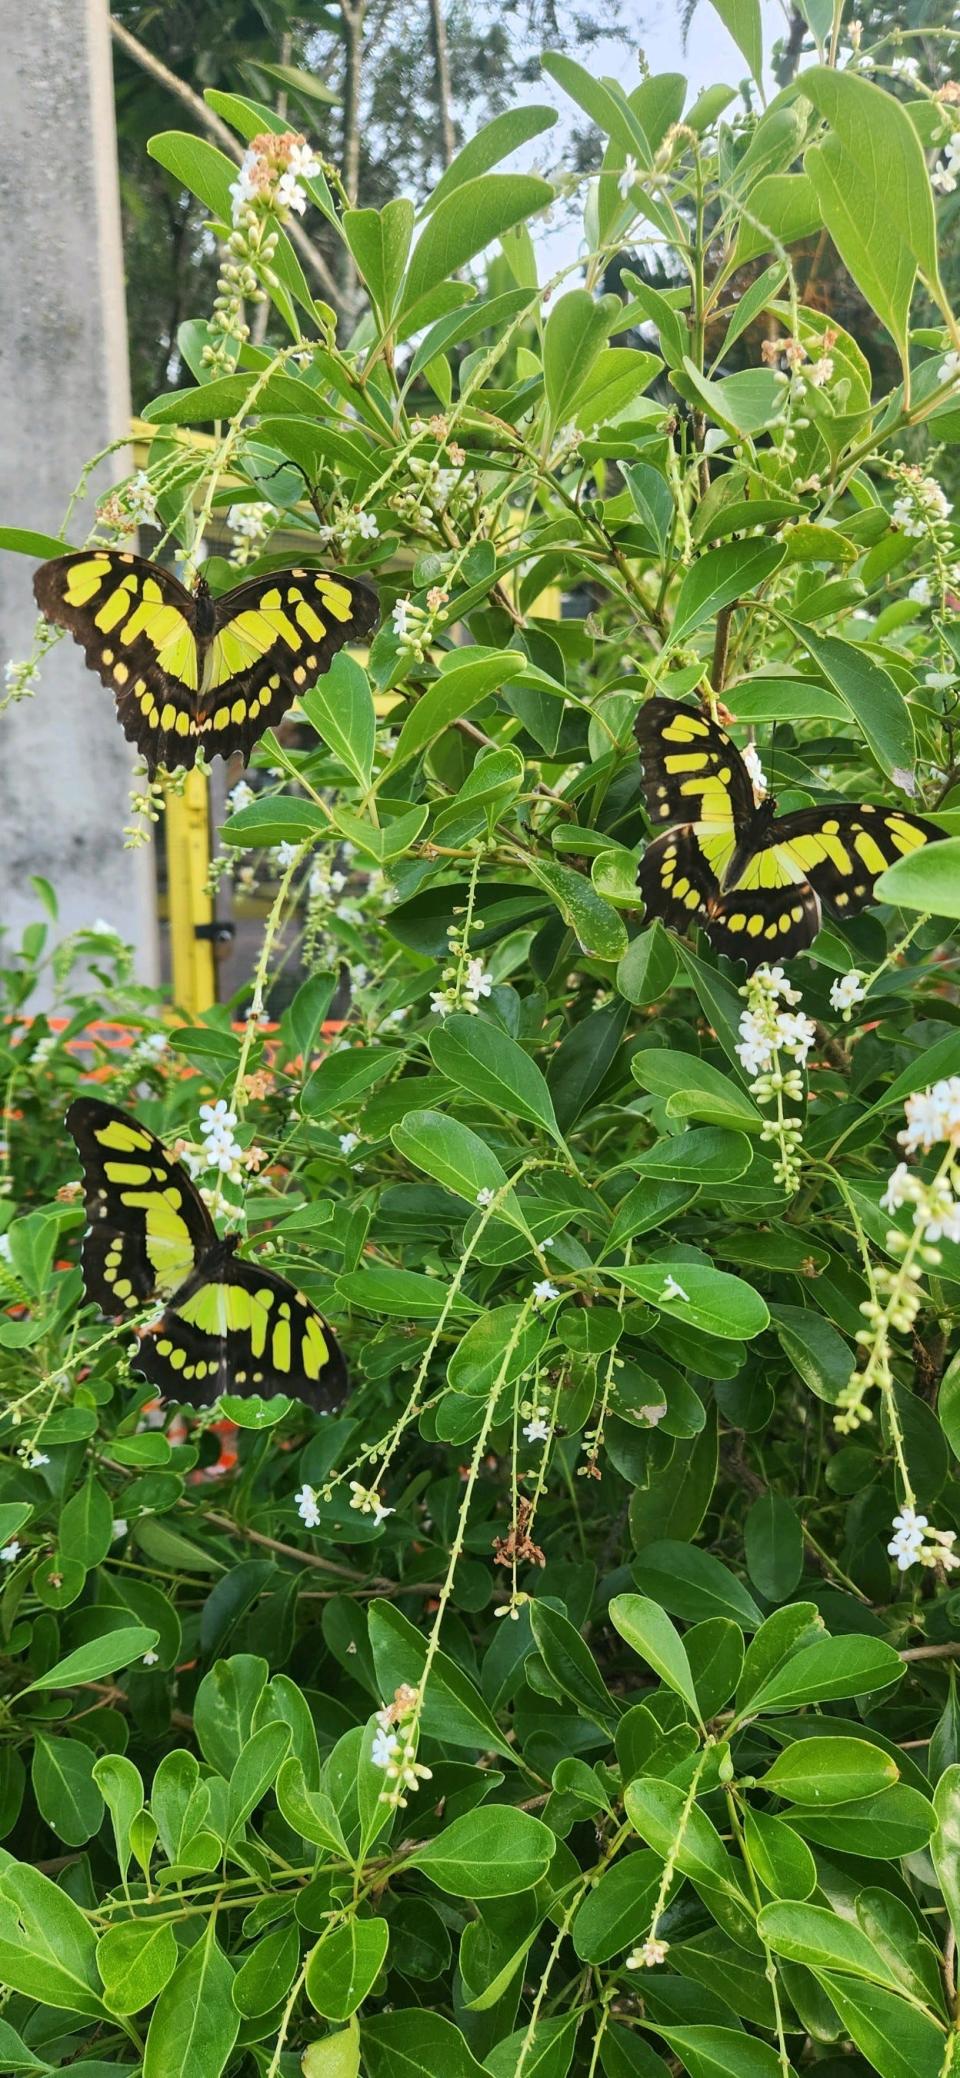 Malachite butterflies pose for the camera in the new butterfly garden at Shell Factory Nature Park.